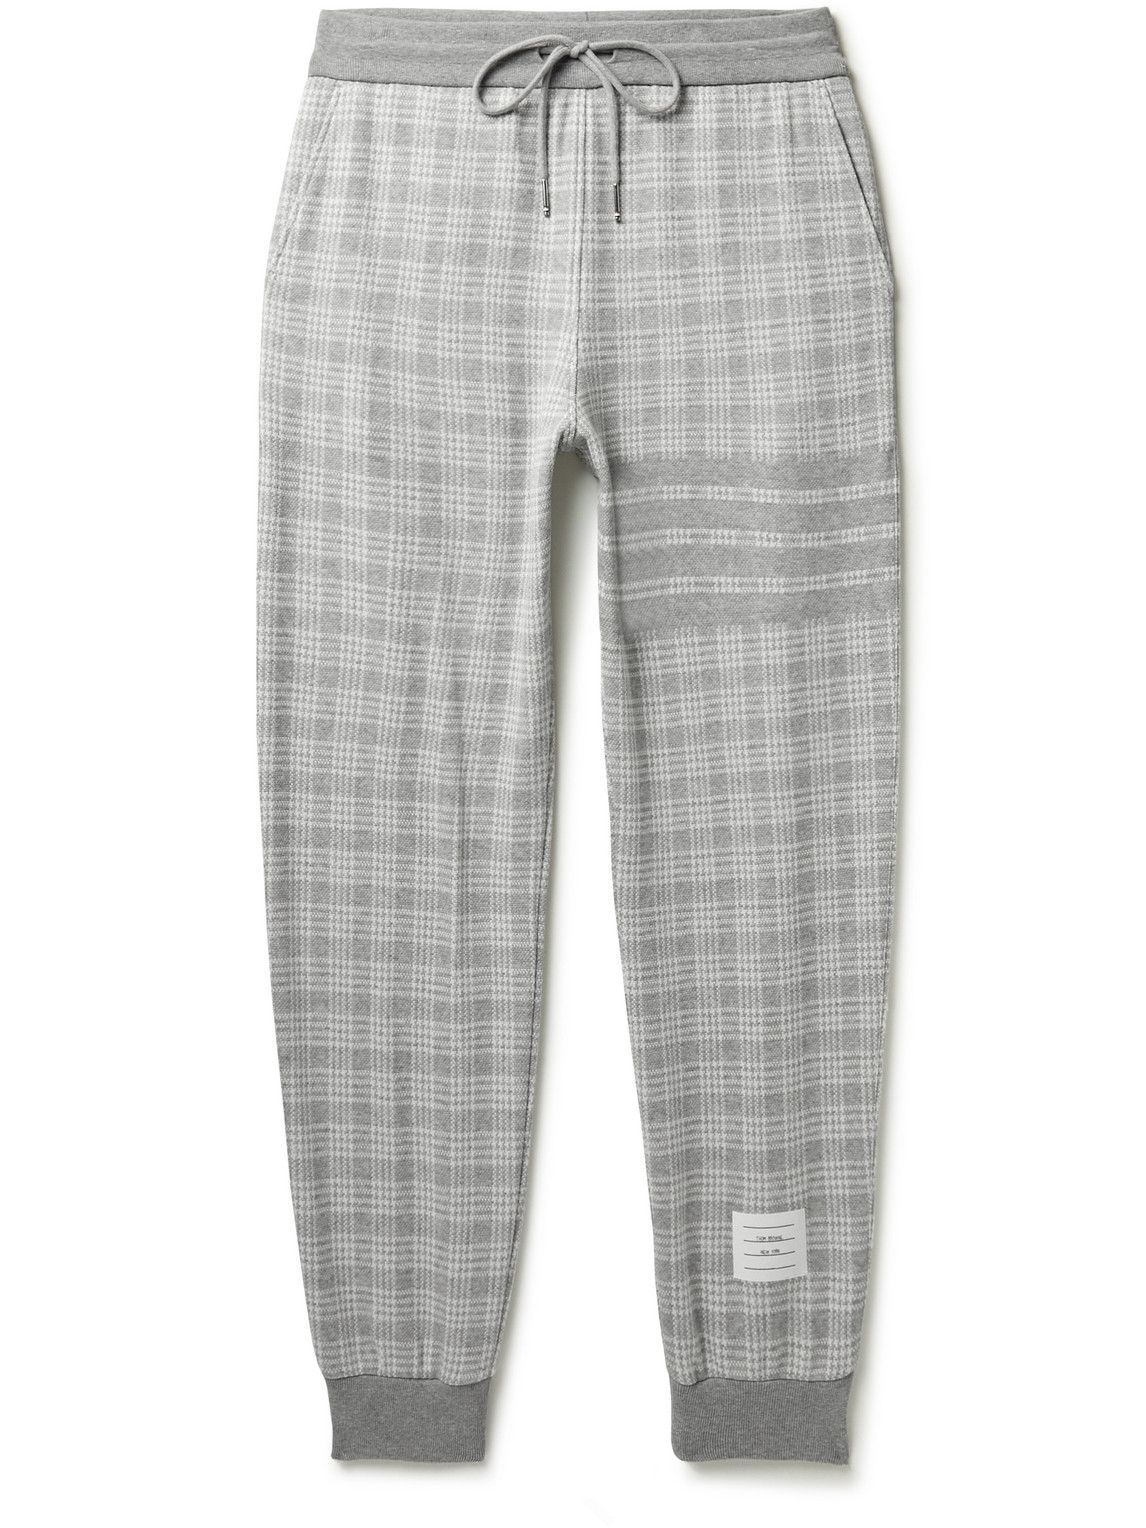 Thom Browne - Slim-Fit Tapered Prince of Wales Cotton Sweatpants - Gray ...